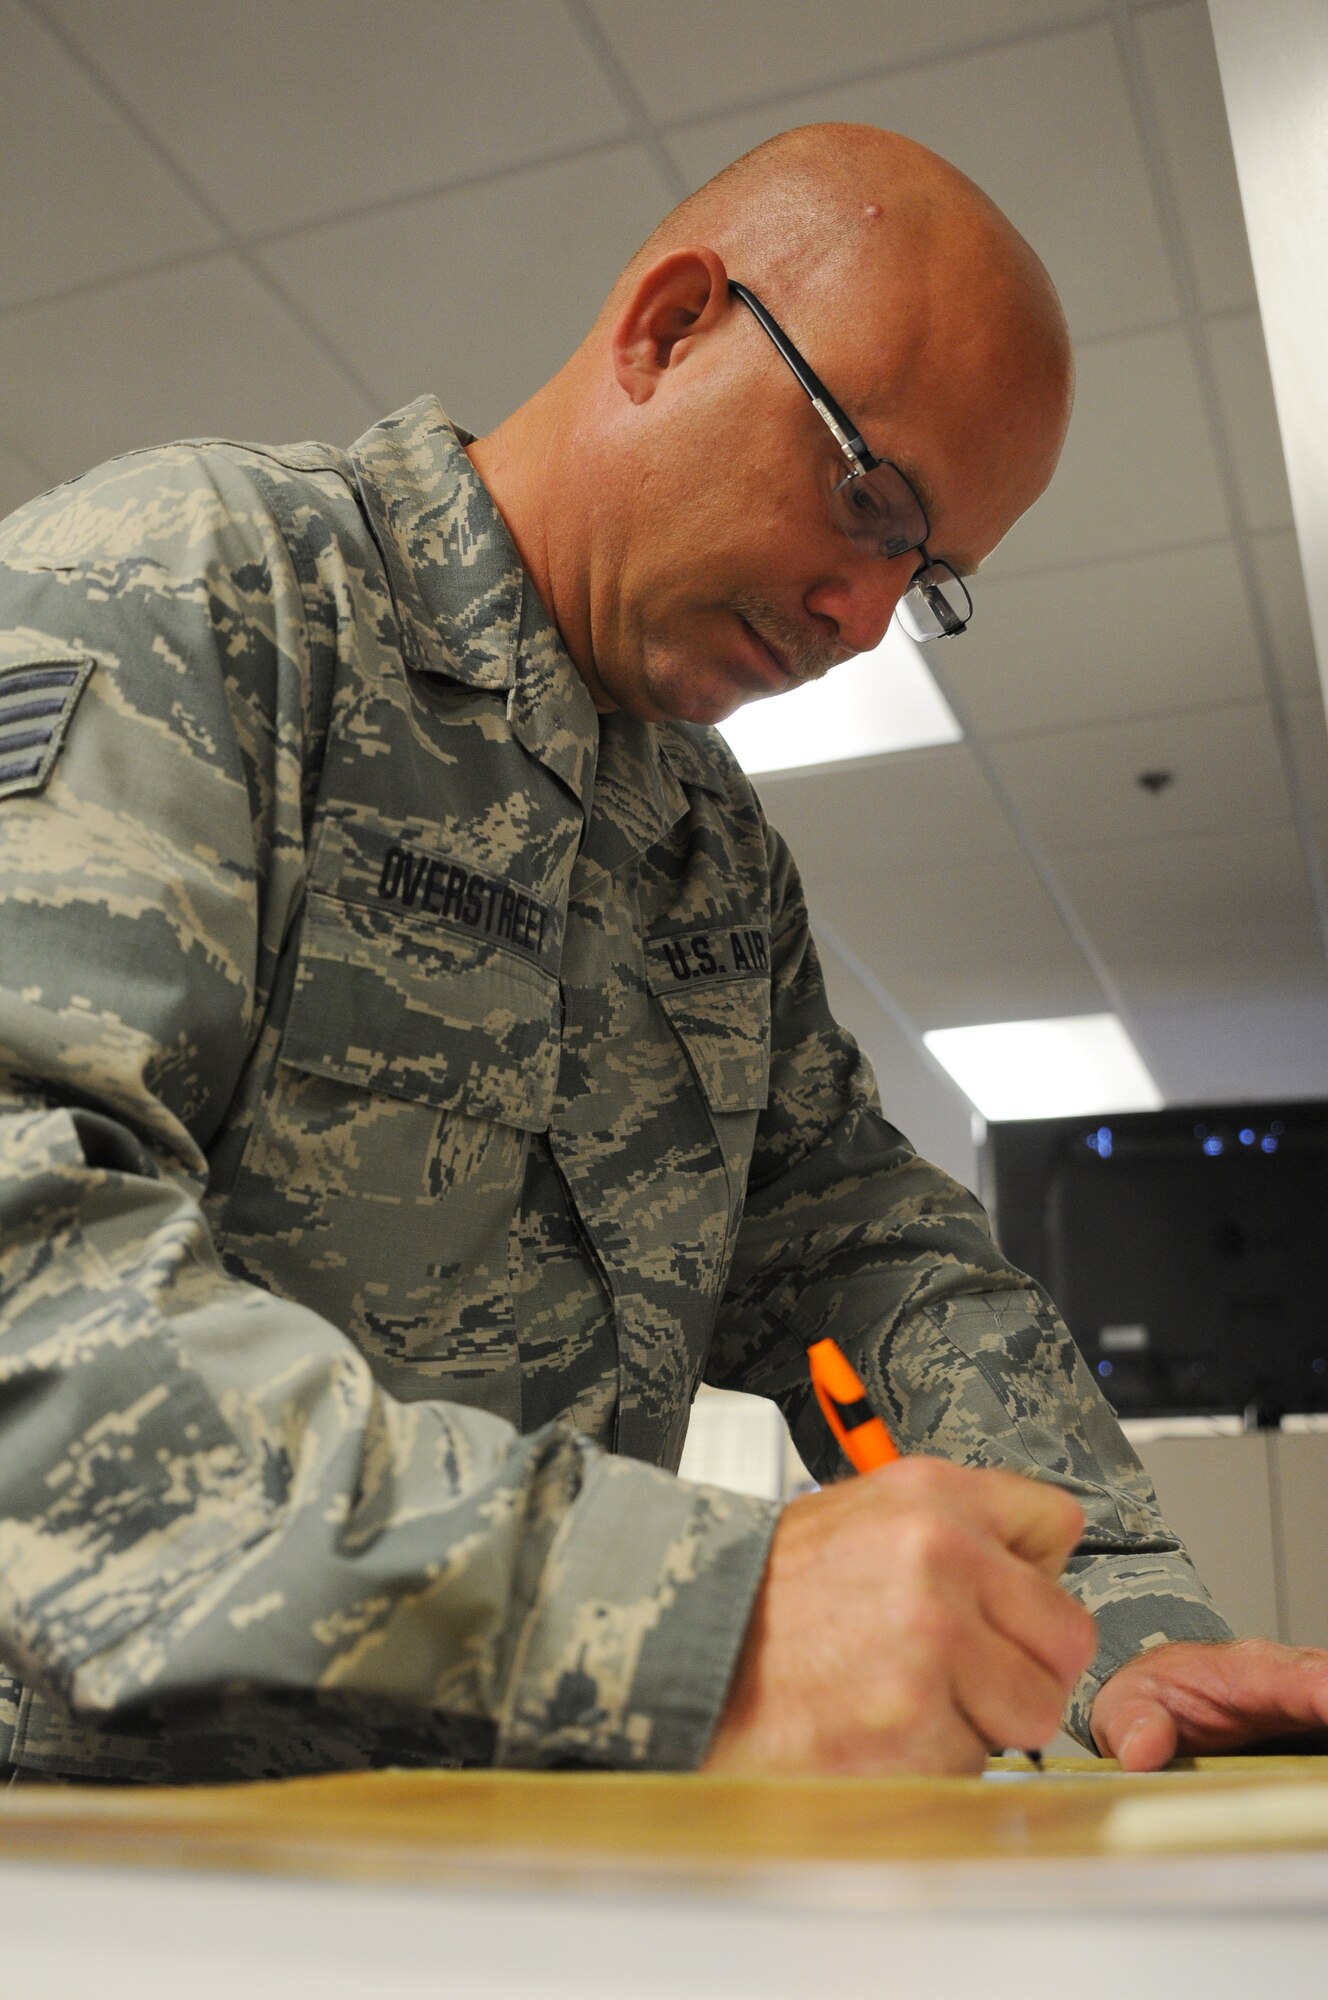 Staff Sgt. Tony Overstreet, 188th Force Support Squadron customer service representative, inputs data in 188th Wing personnel records at Ebbing Air National Guard Base, Fort Smith, Ark., Sept. 20, 2015. Overstreet was selected for the October 2015 The Flying Razorback spotlight. (U.S. Air National Guard photo by Senior Airman Cody Martin/Released)